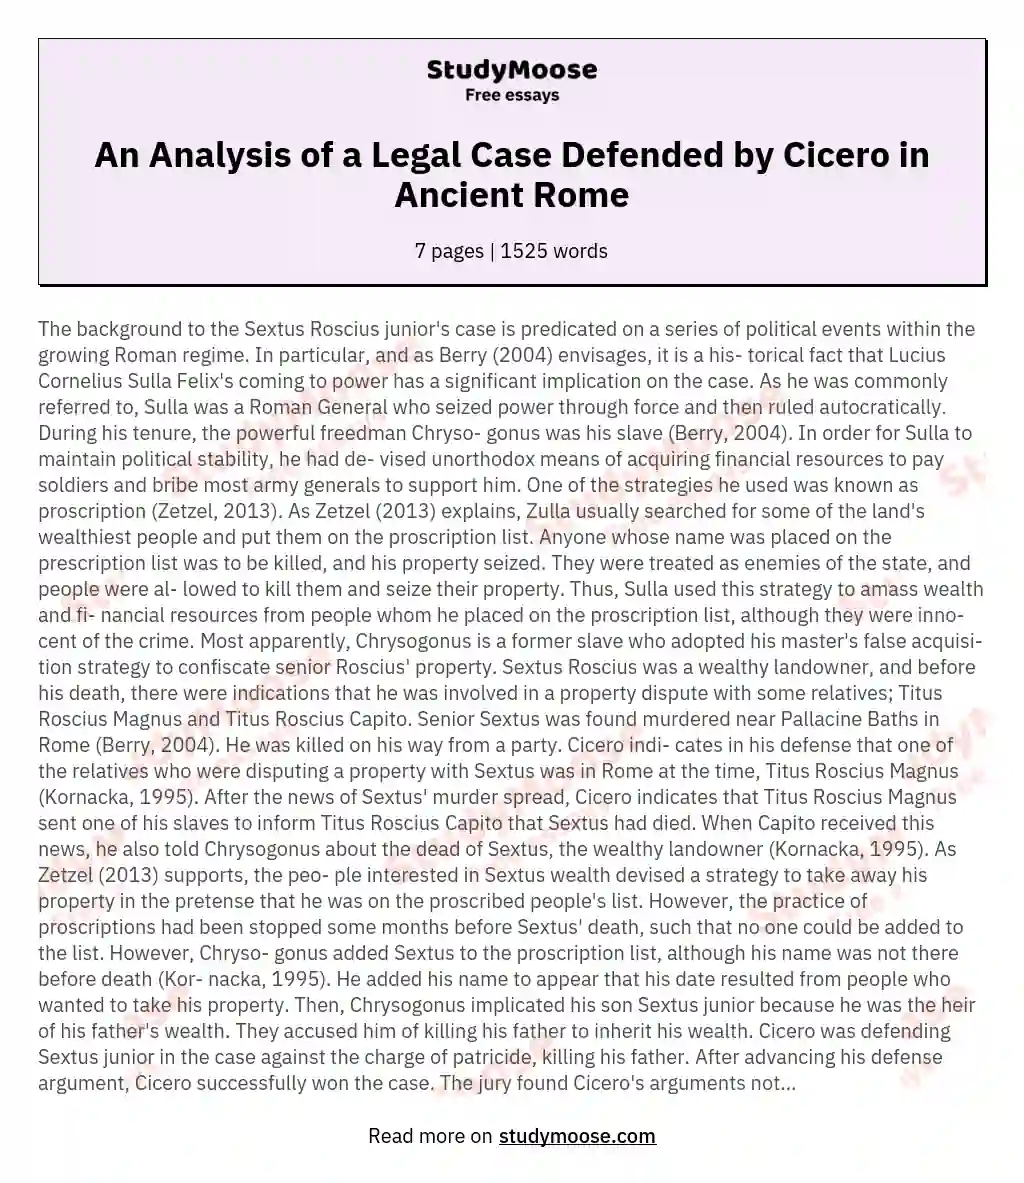 An Analysis of a Legal Case Defended by Cicero in Ancient Rome essay